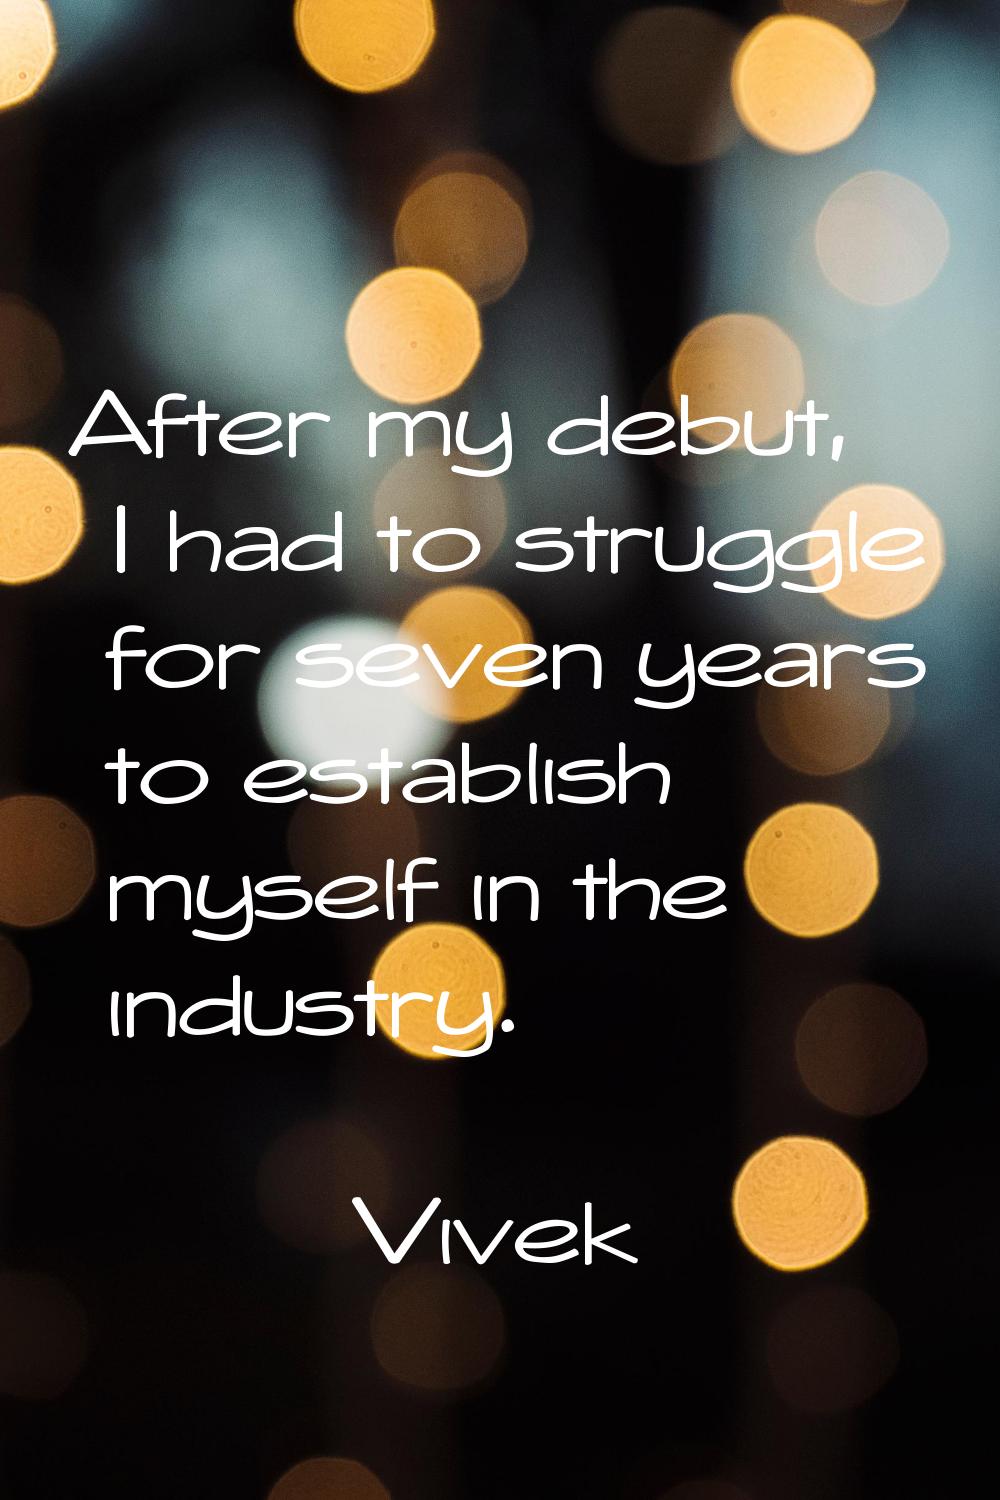 After my debut, I had to struggle for seven years to establish myself in the industry.